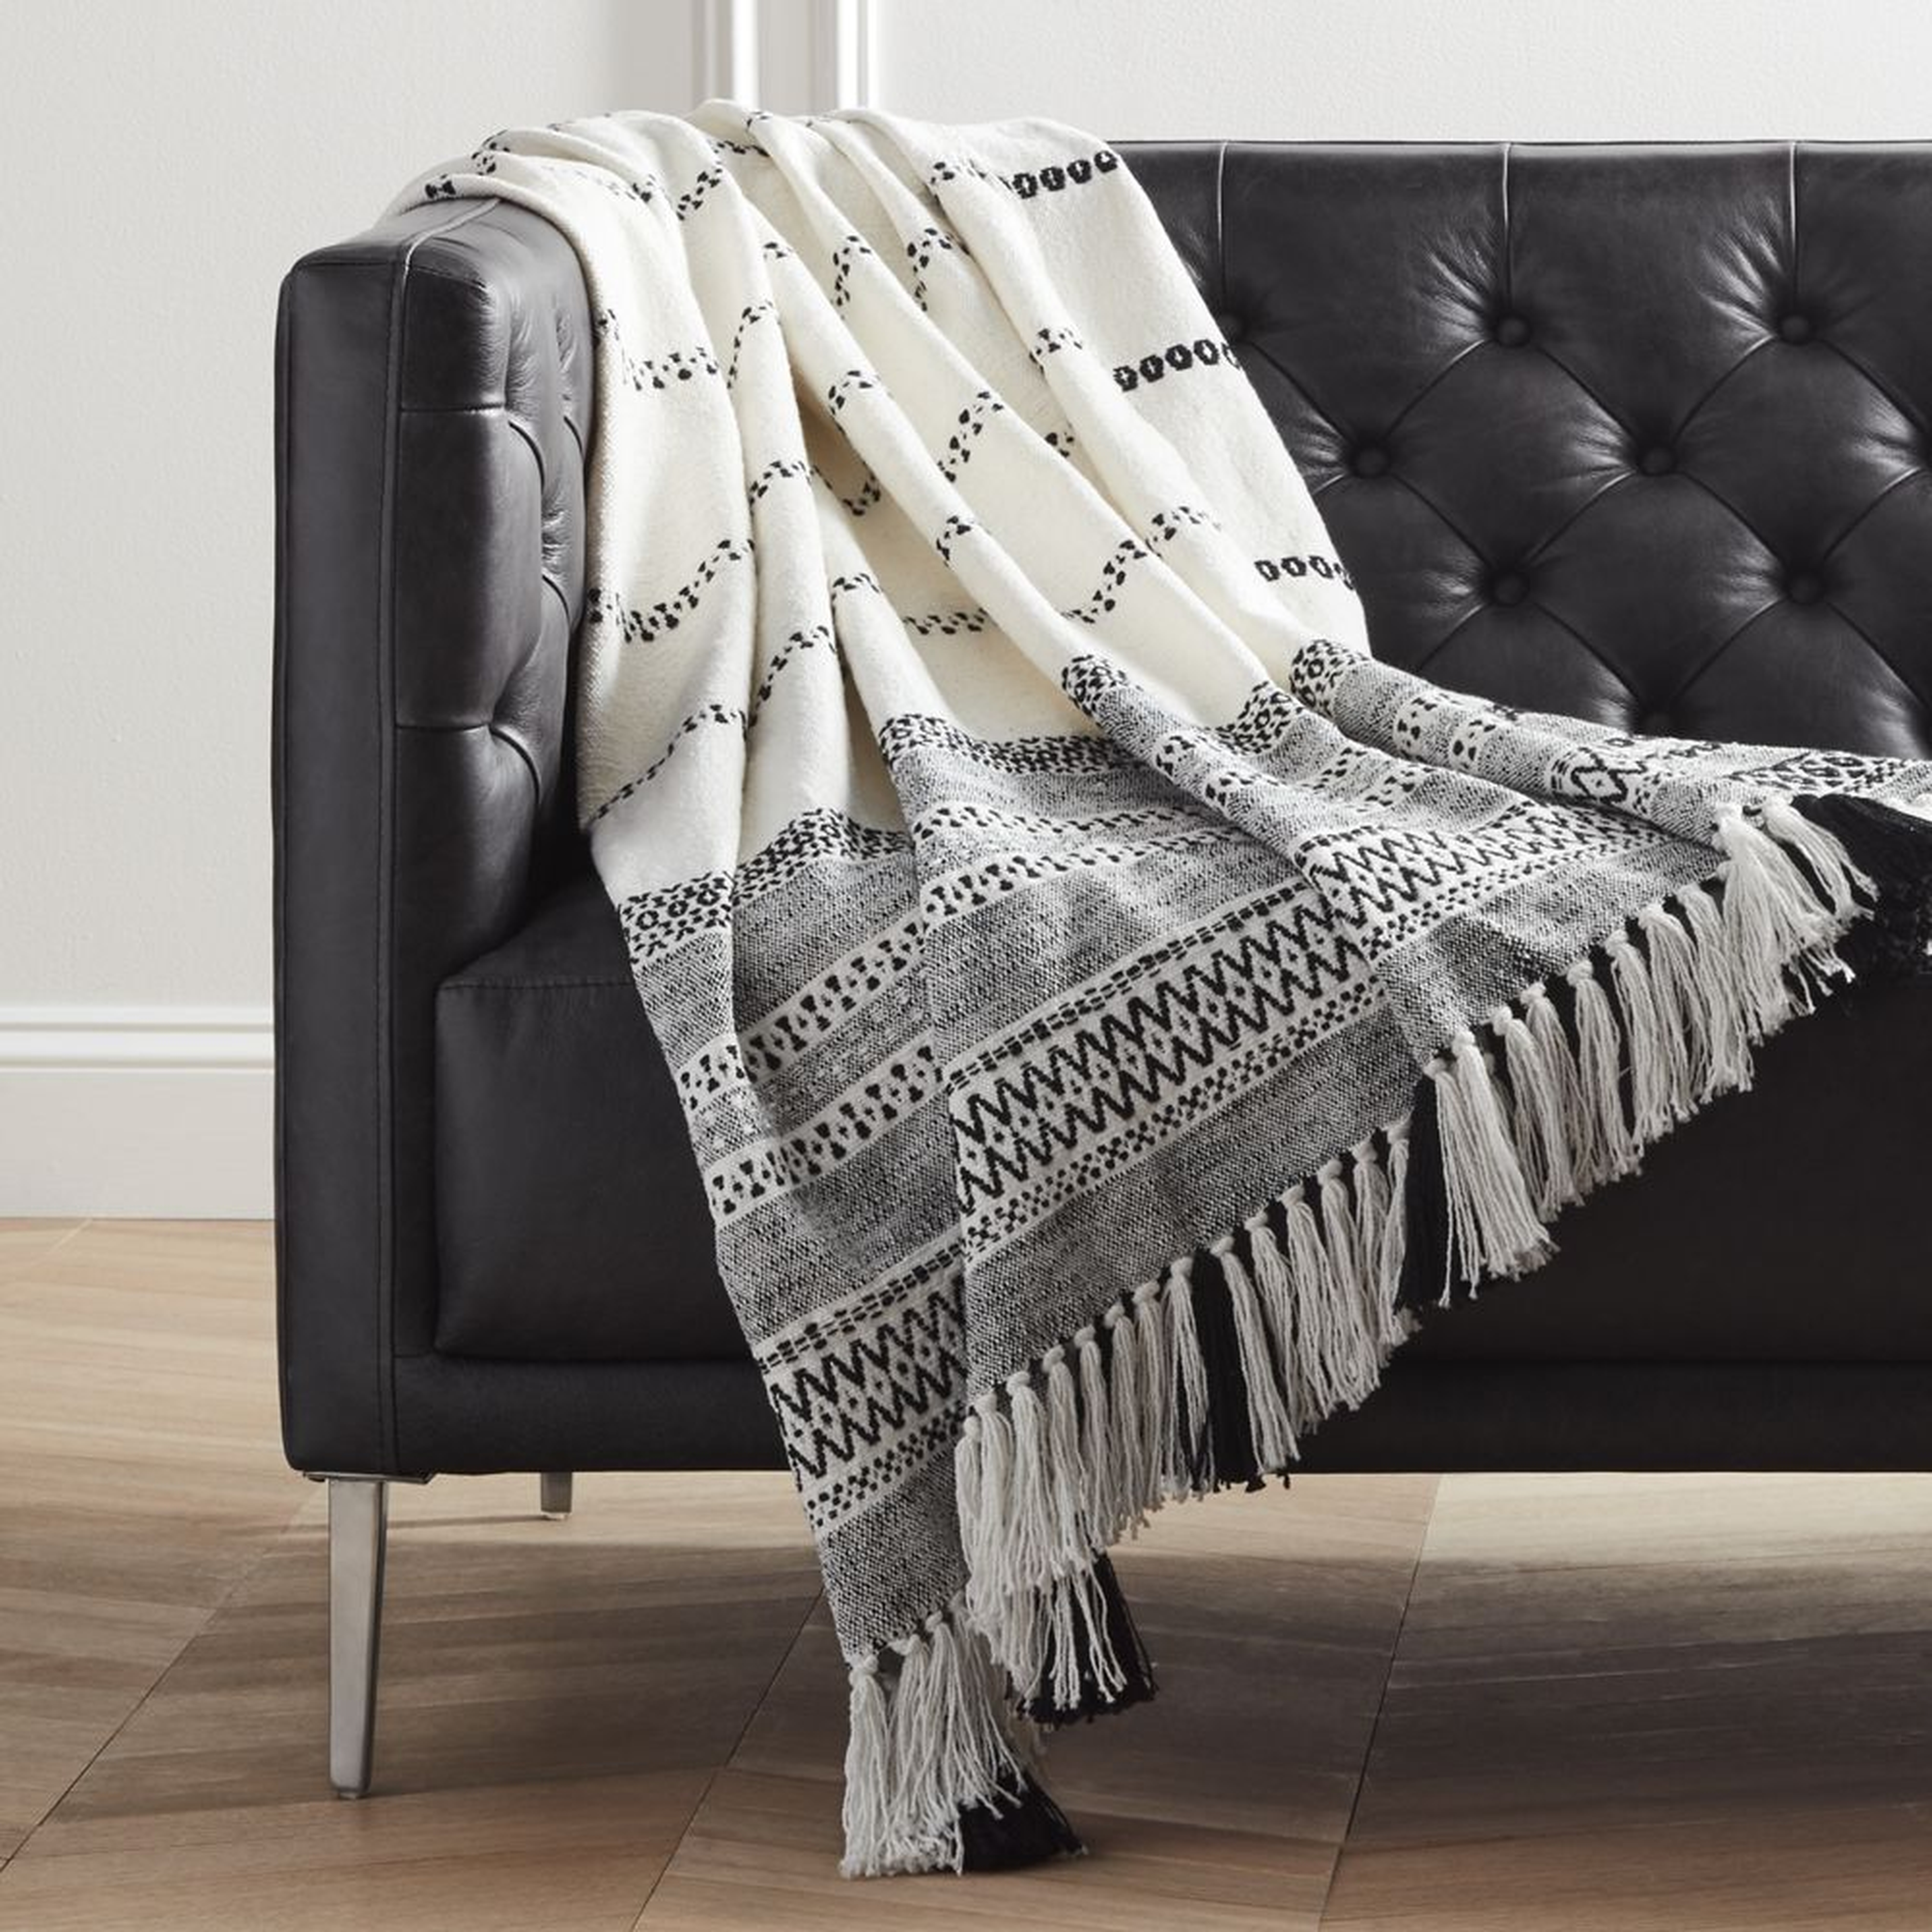 Jema Black and White Throw with Tassels - CB2